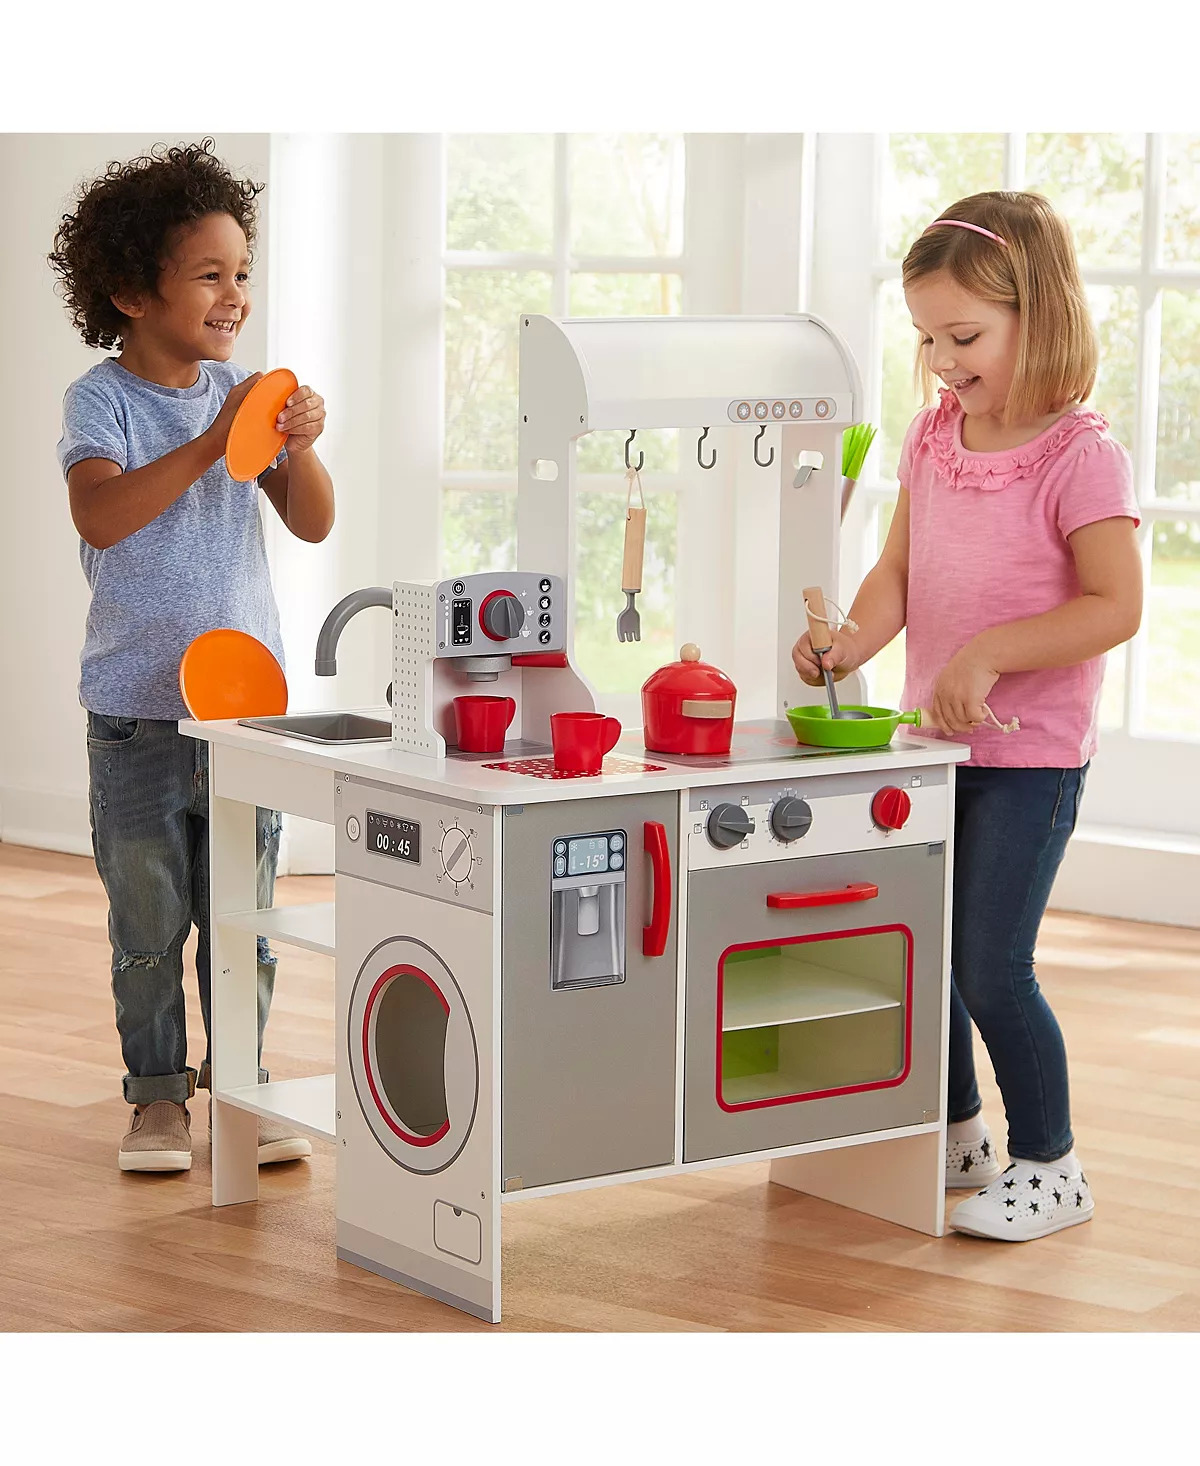 Imaginarium All Around Play Kitchen with Appliances and Accessories $44 + Free Store Pickup at Macy's or FS on $25+